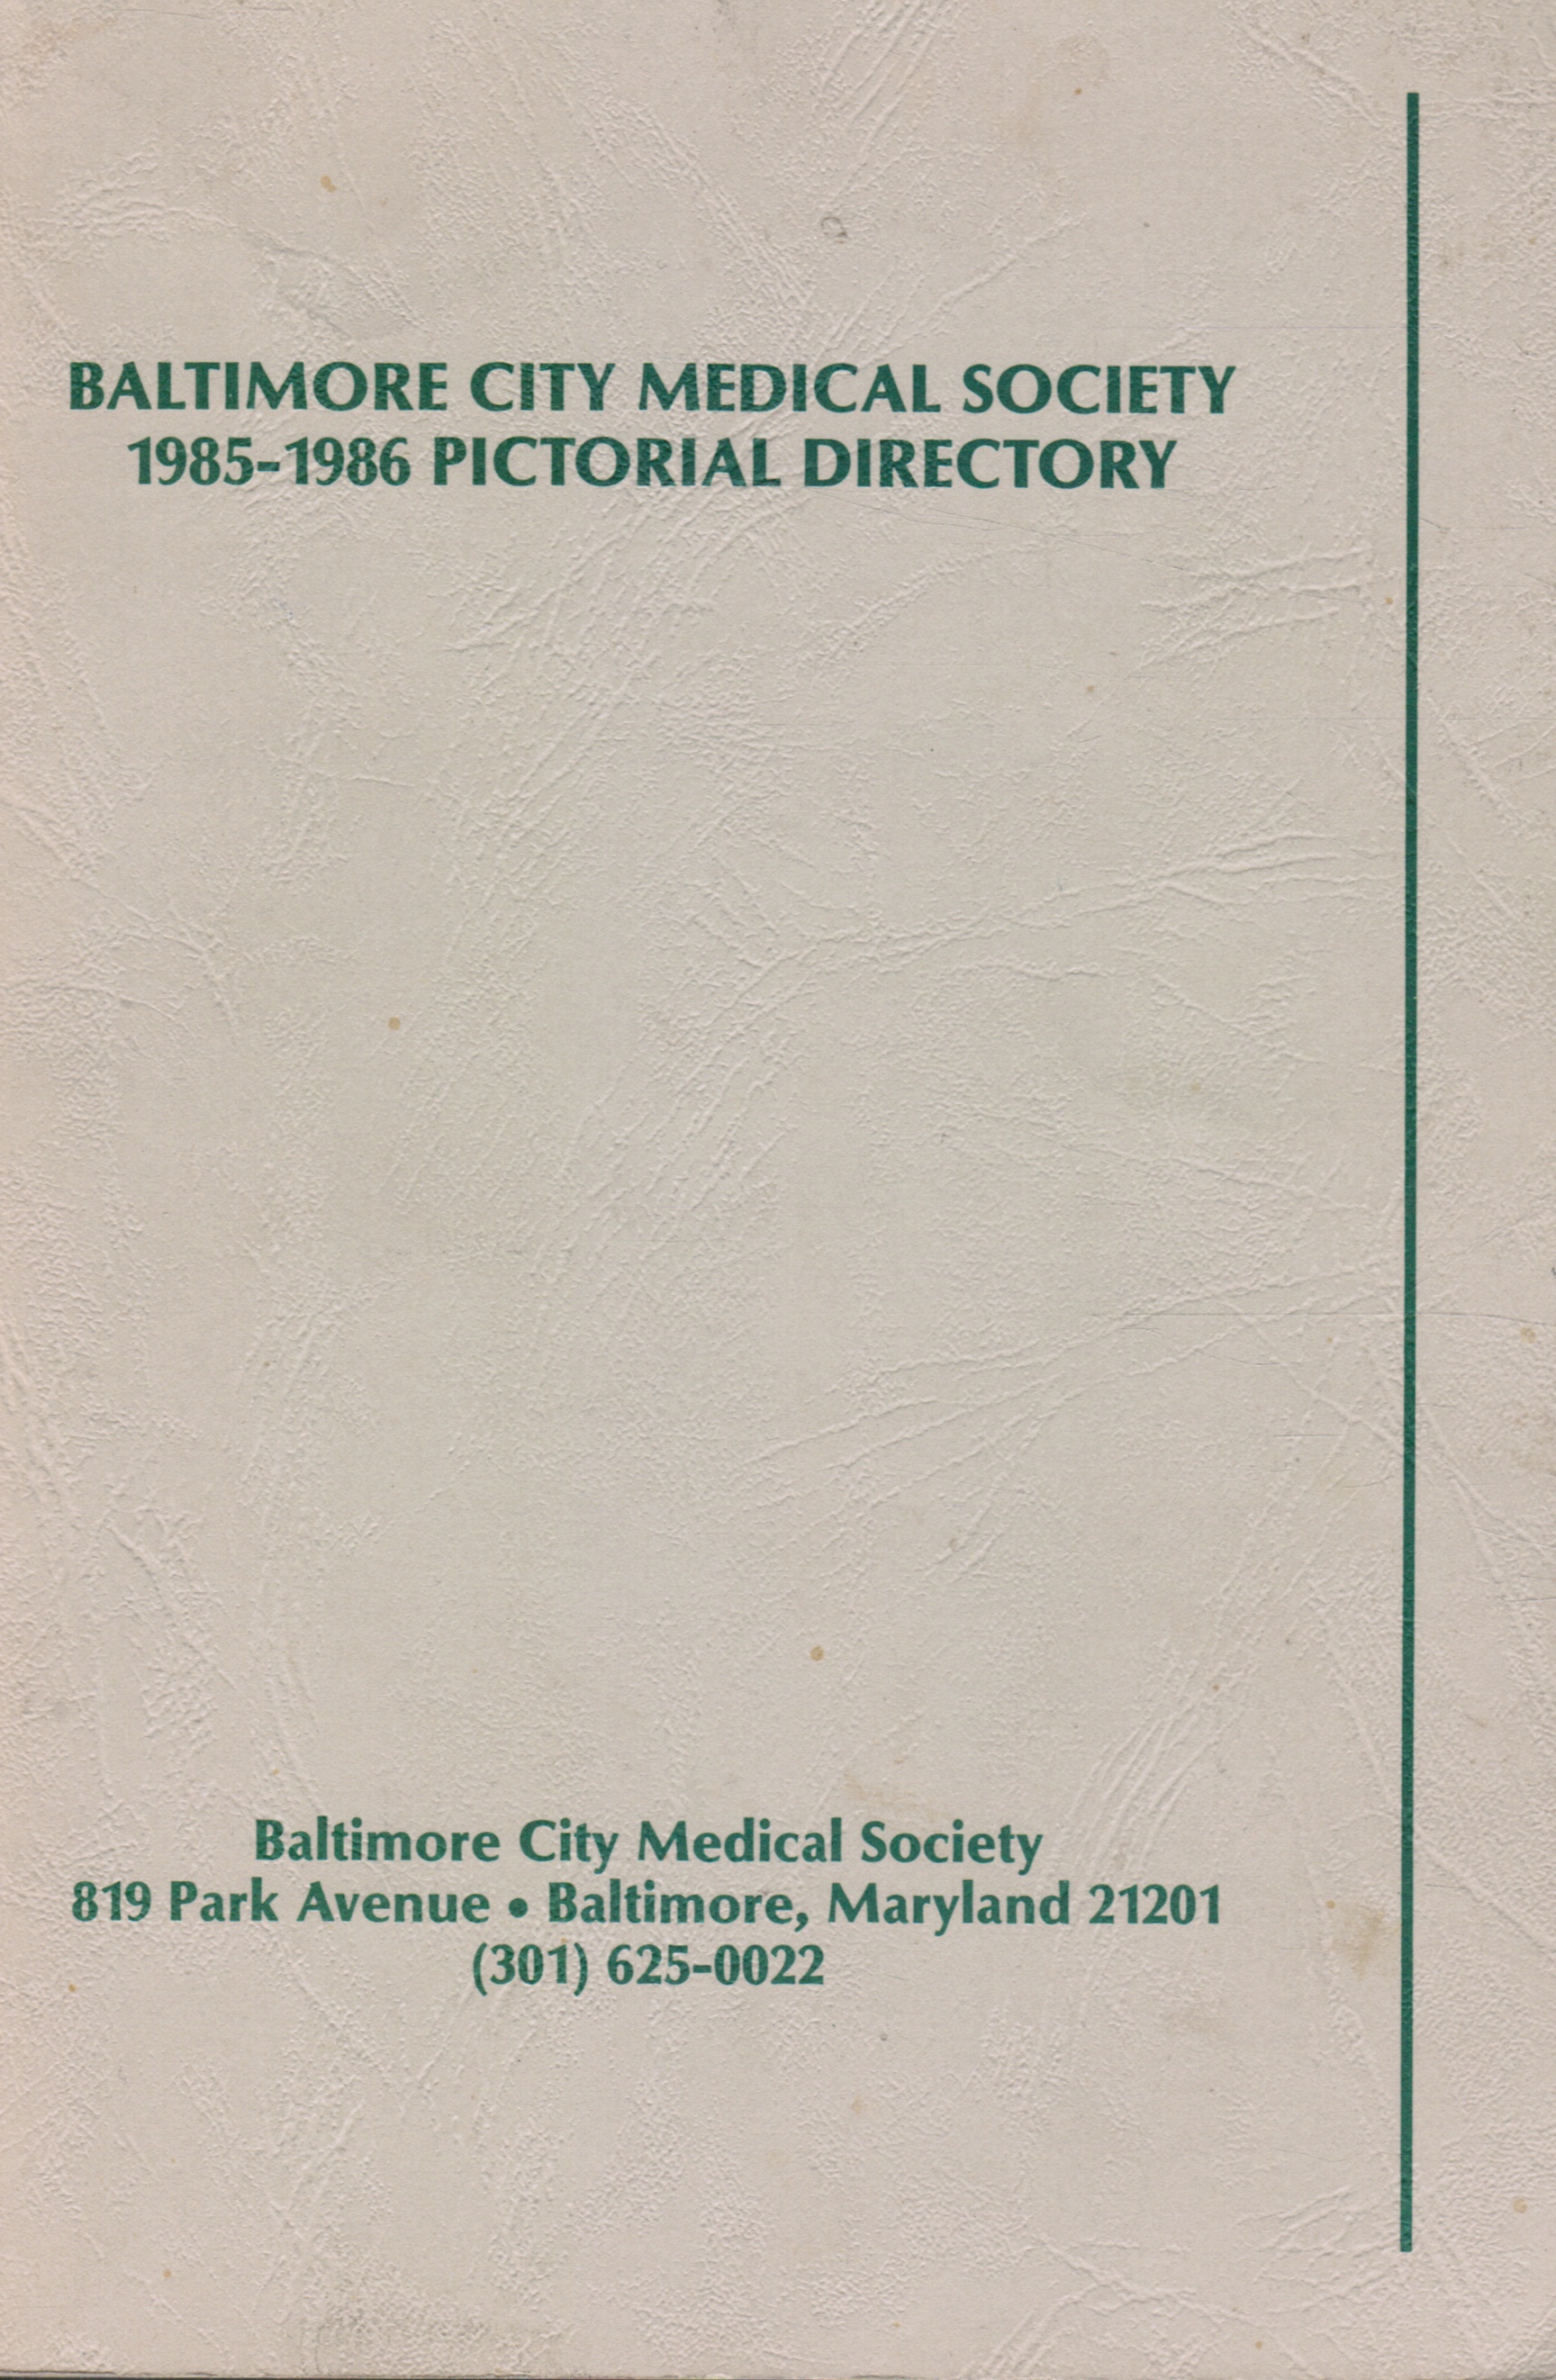  - Baltimore City Medical Society 1985-1986 Pictorial Directory